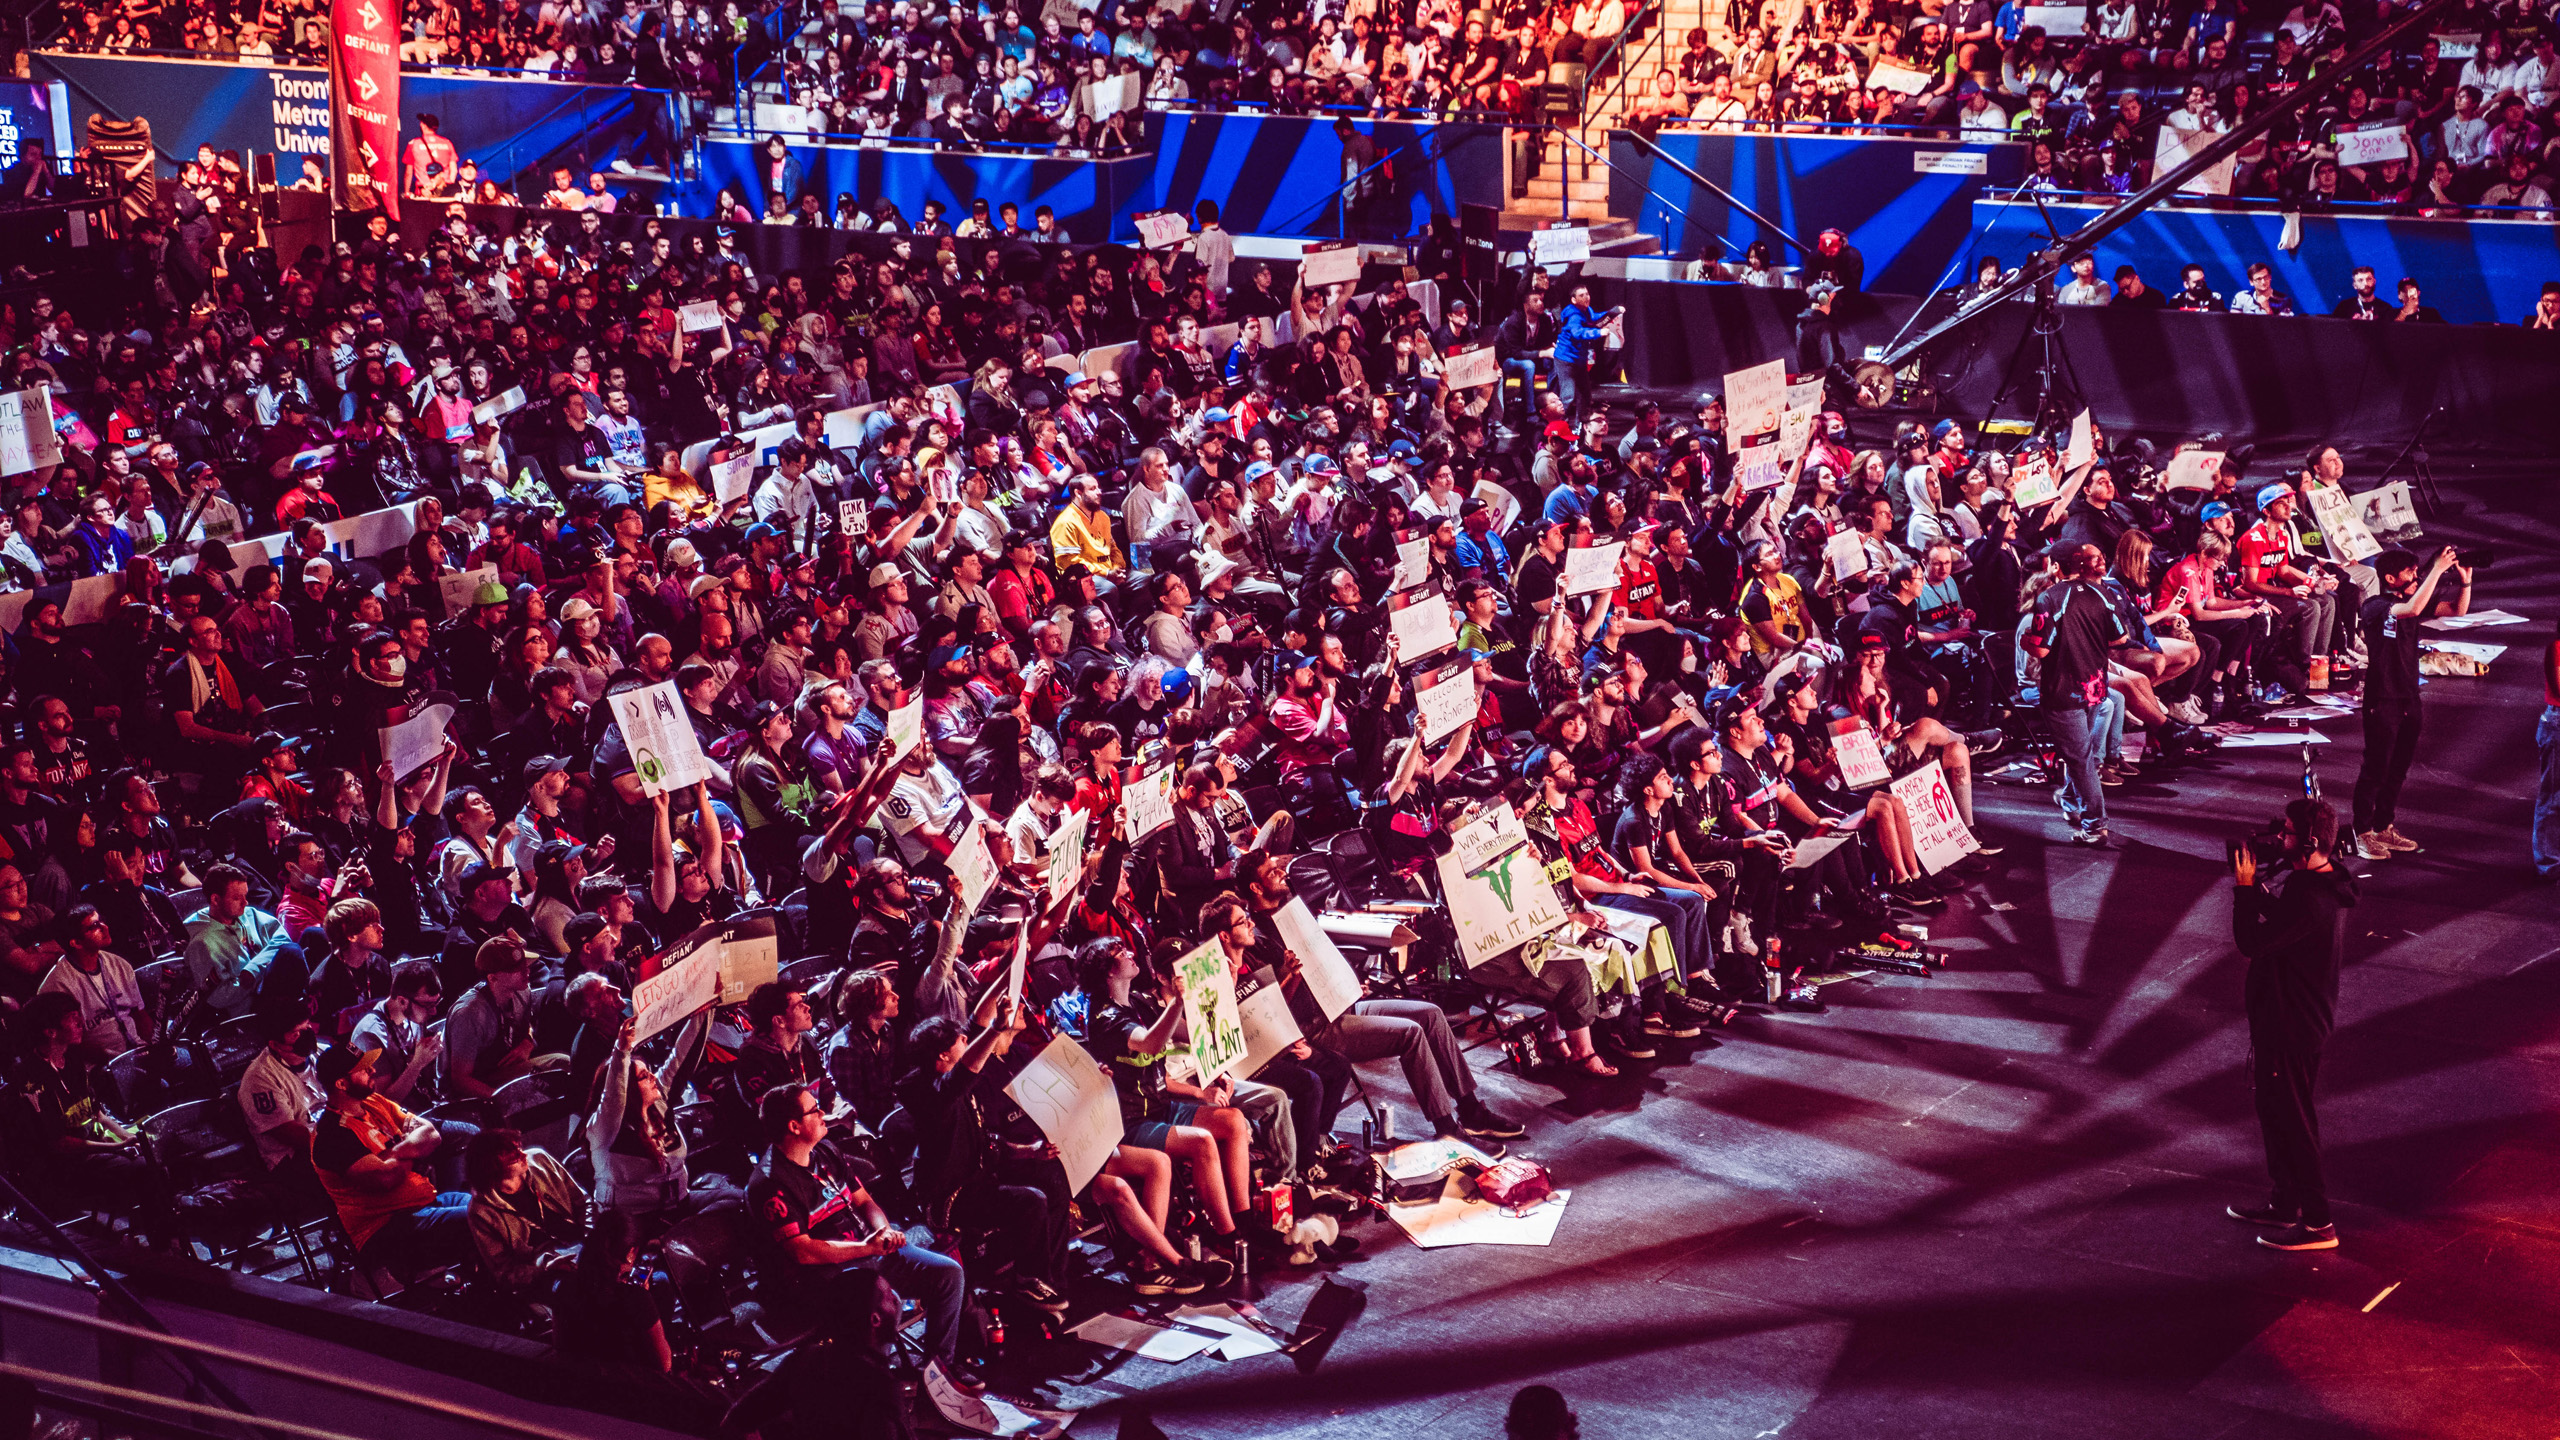 Esports fans sit in stands watching the Overwatch League